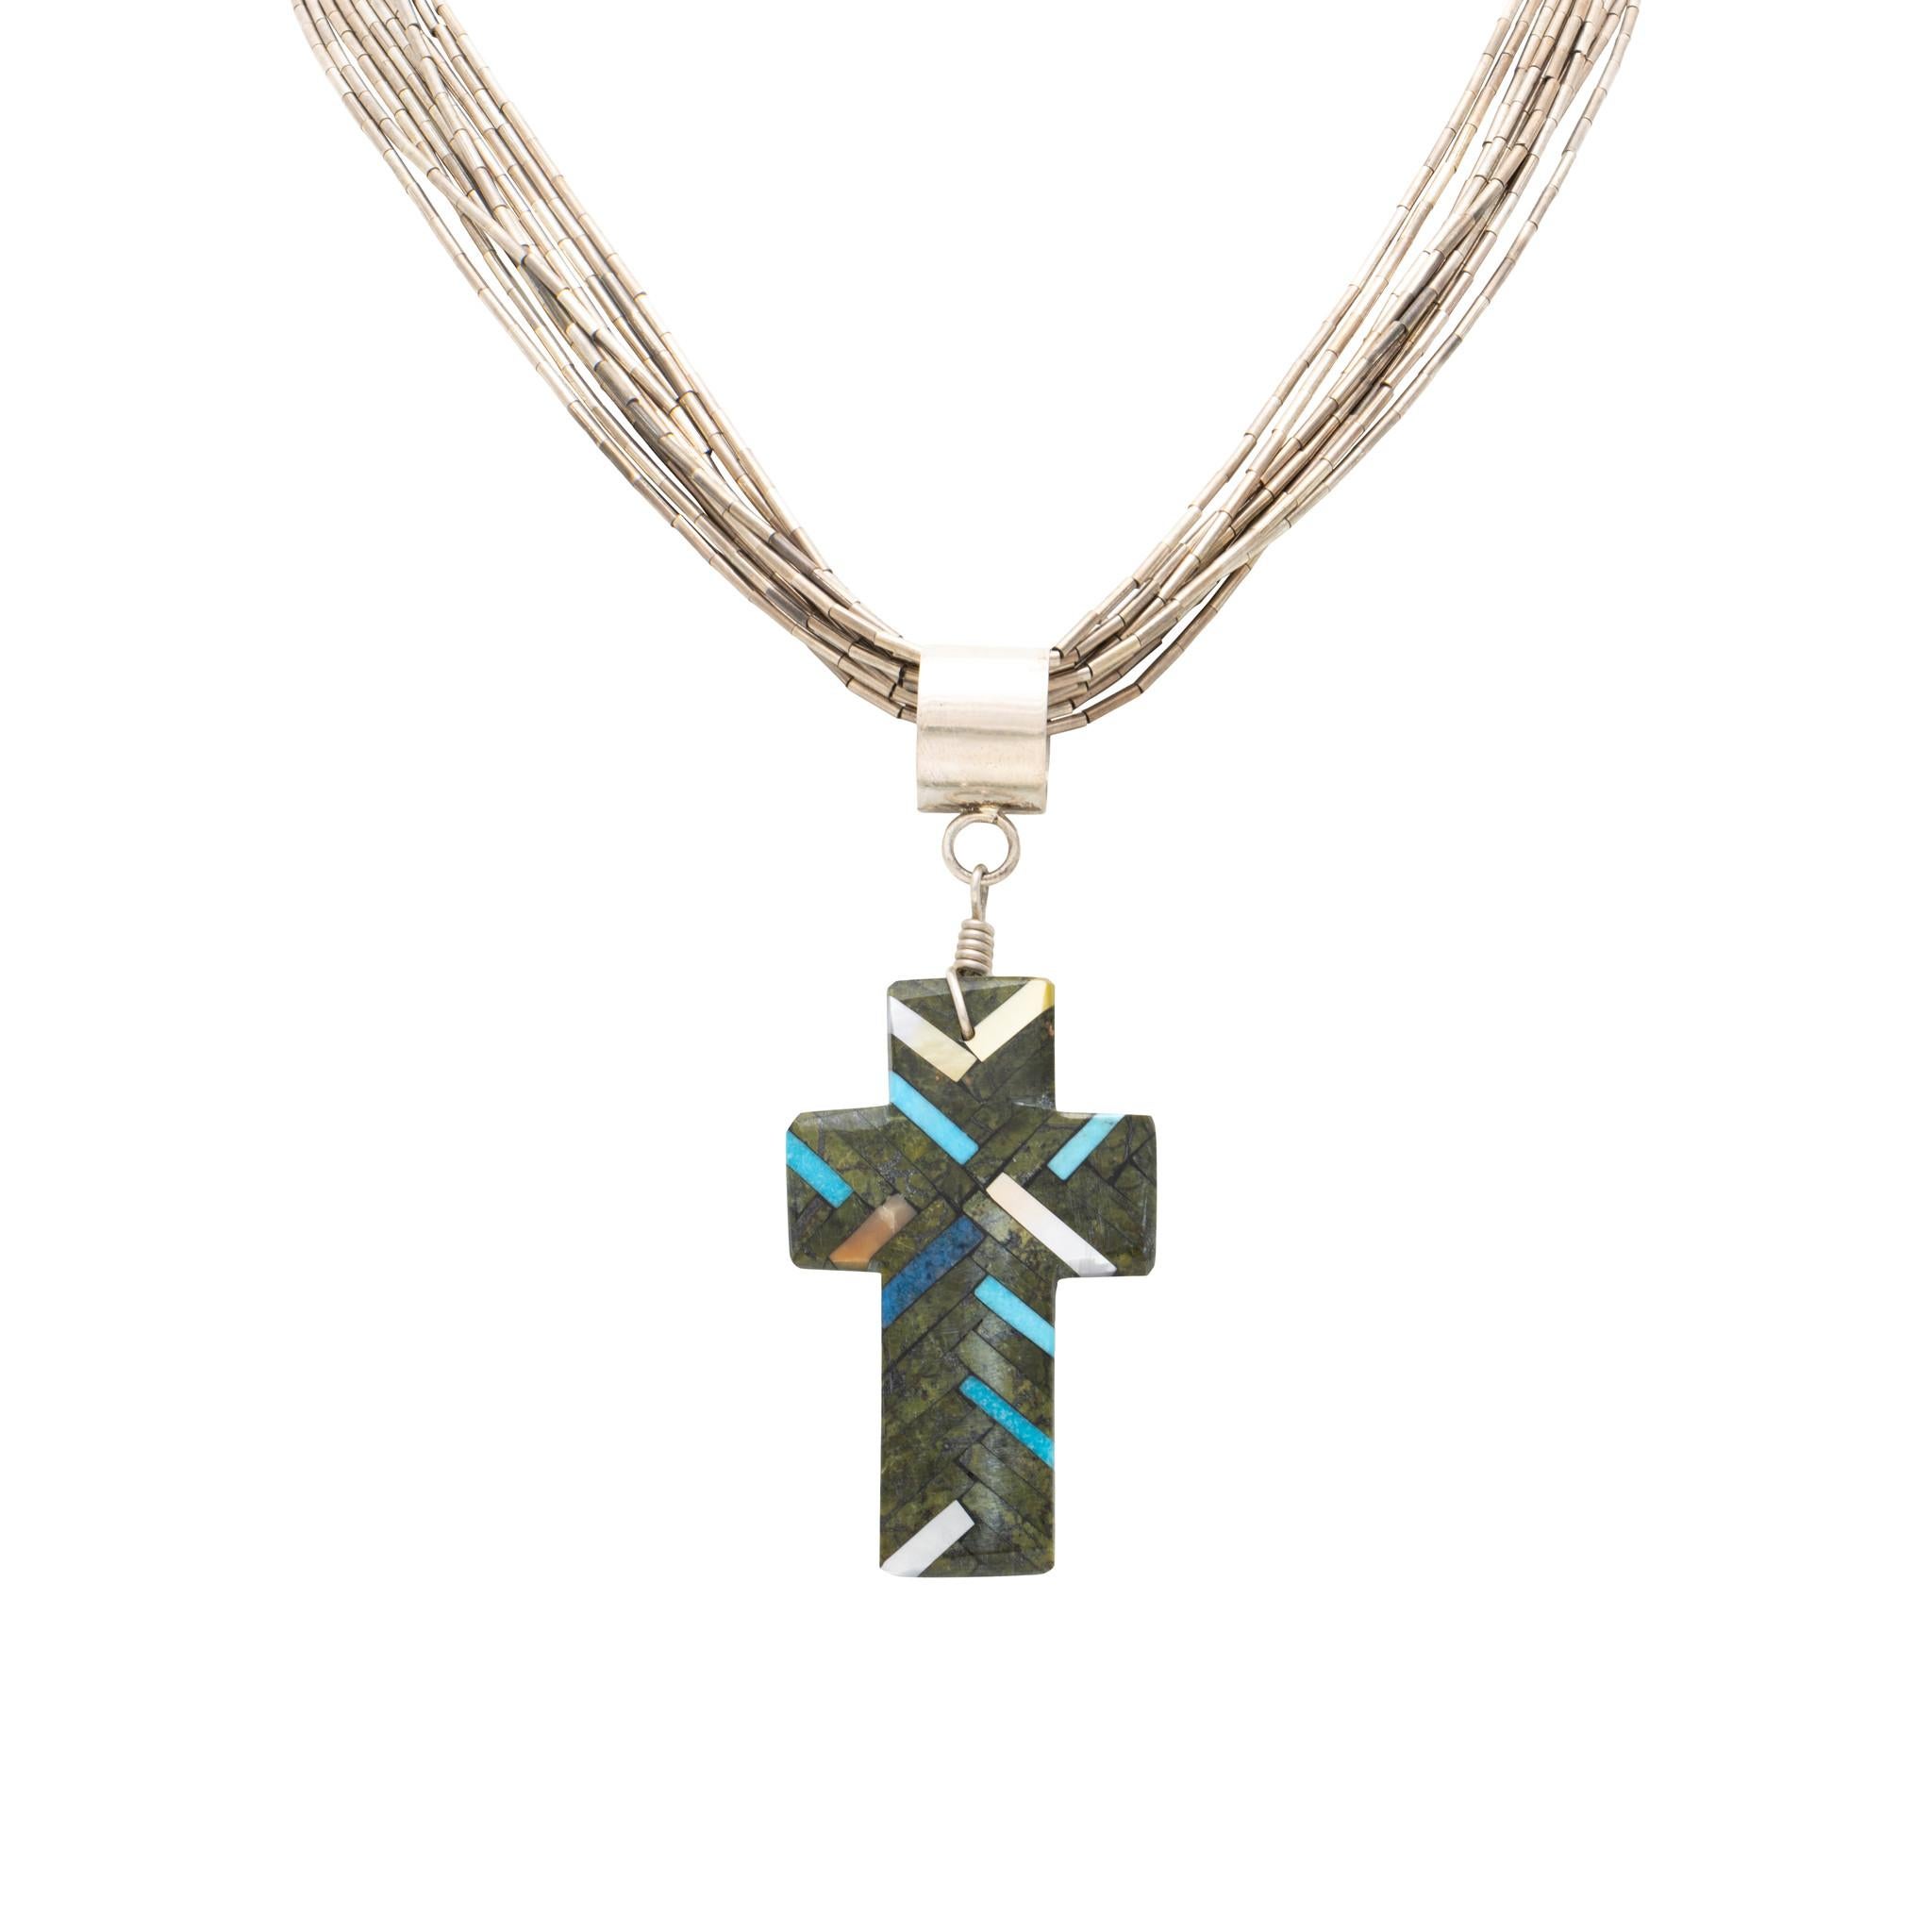 Native American Santo Domingo Indian turquoise and shell cross pendant. Pendant features a variety of stones including turquoise, mother of pearl, and more. Stones are inlaid in a herringbone pattern in a short, sleek design. Has large loop to